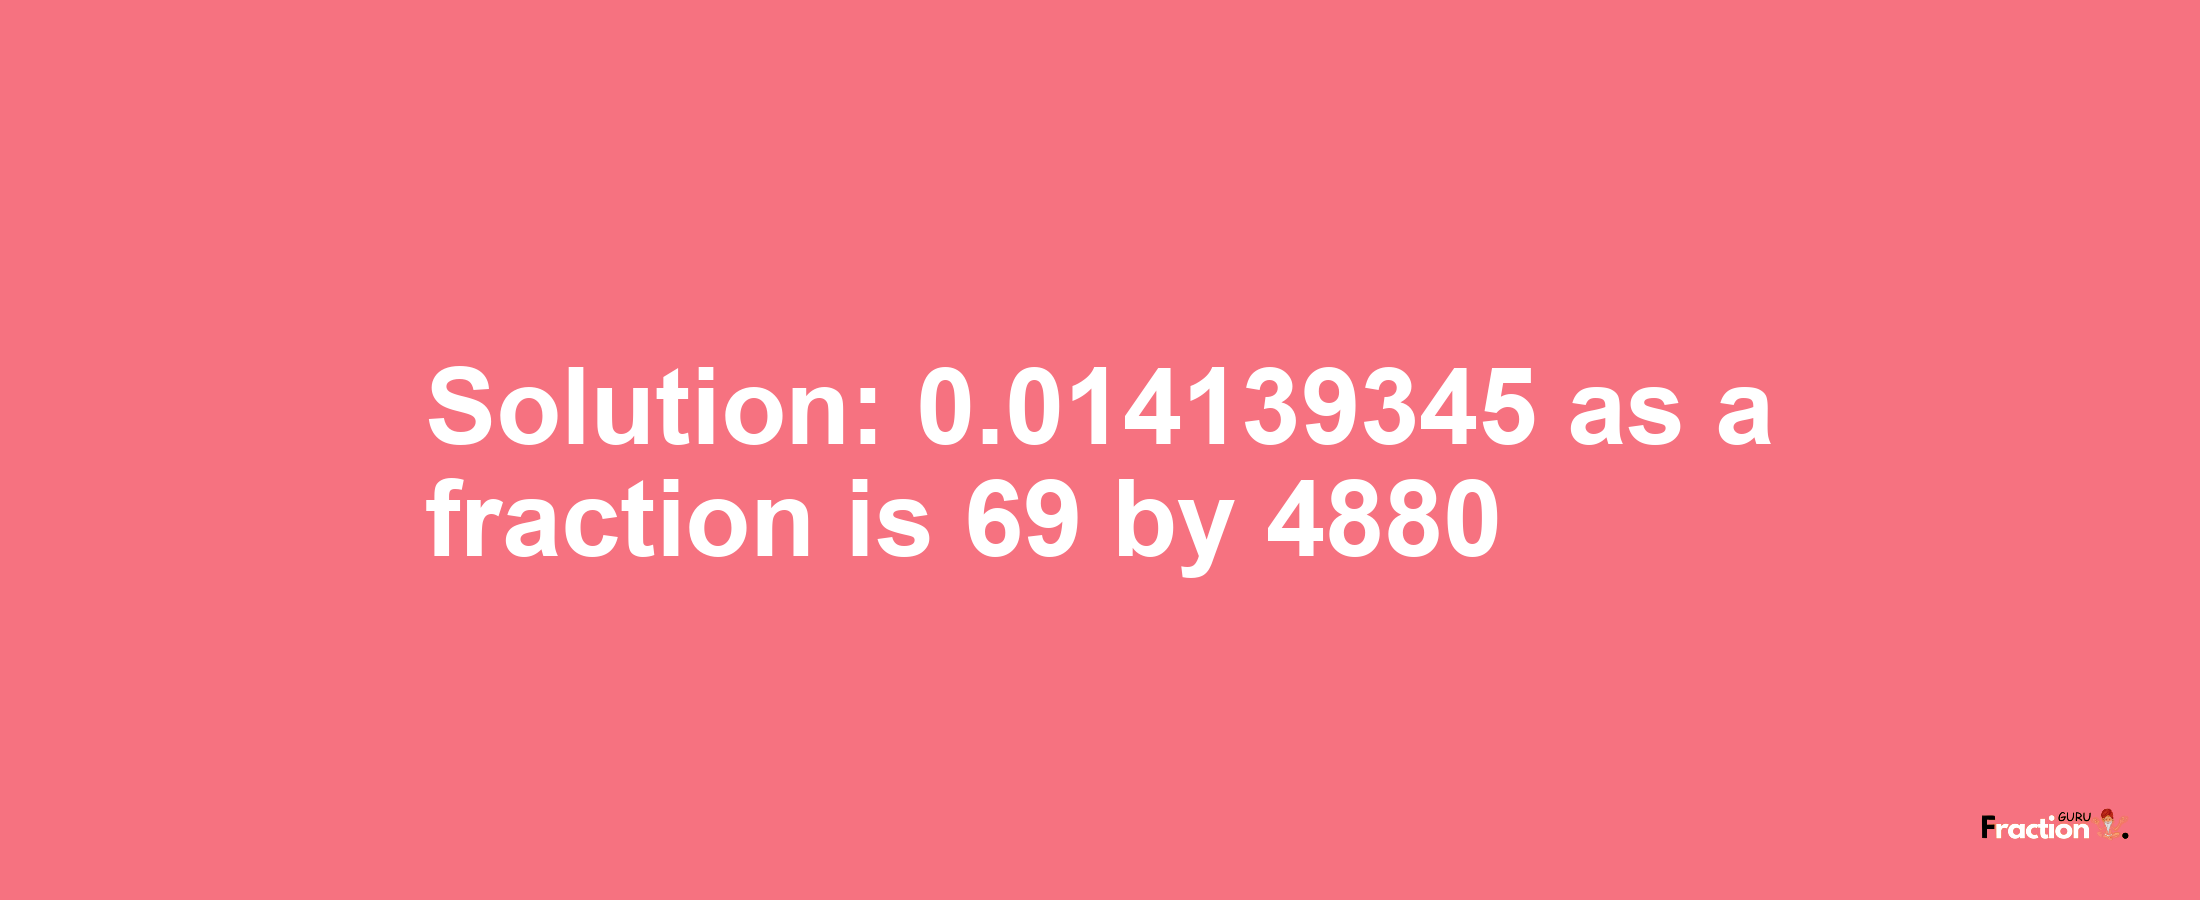 Solution:0.014139345 as a fraction is 69/4880